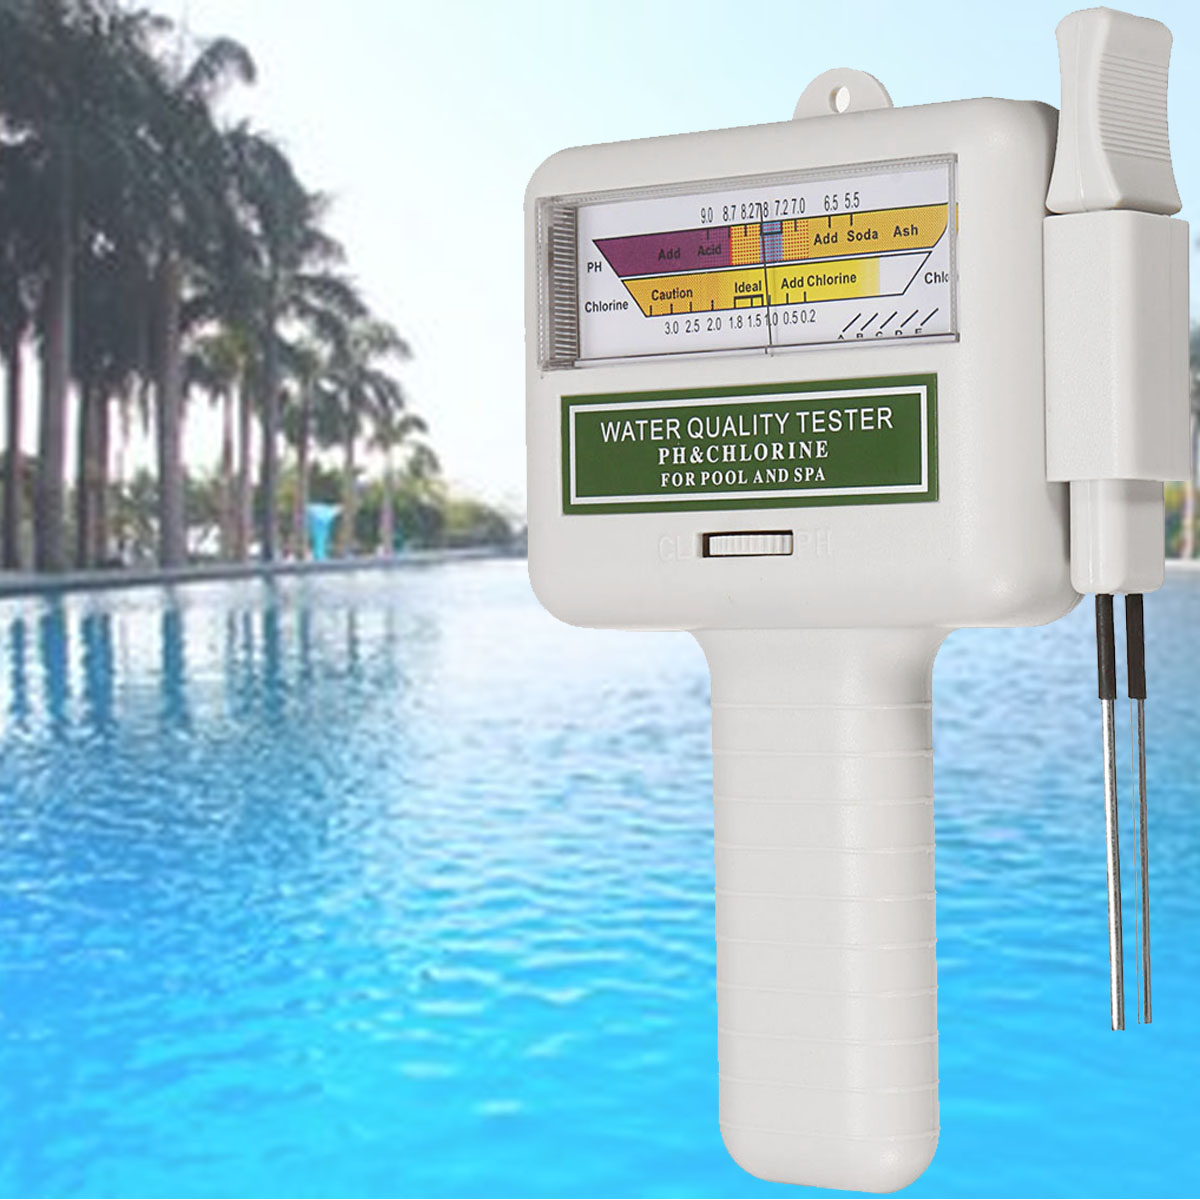 PC101 Water Quality Tester PH CL2 Chlorine Level Meter Monitor Swimming Pool Spa Tester